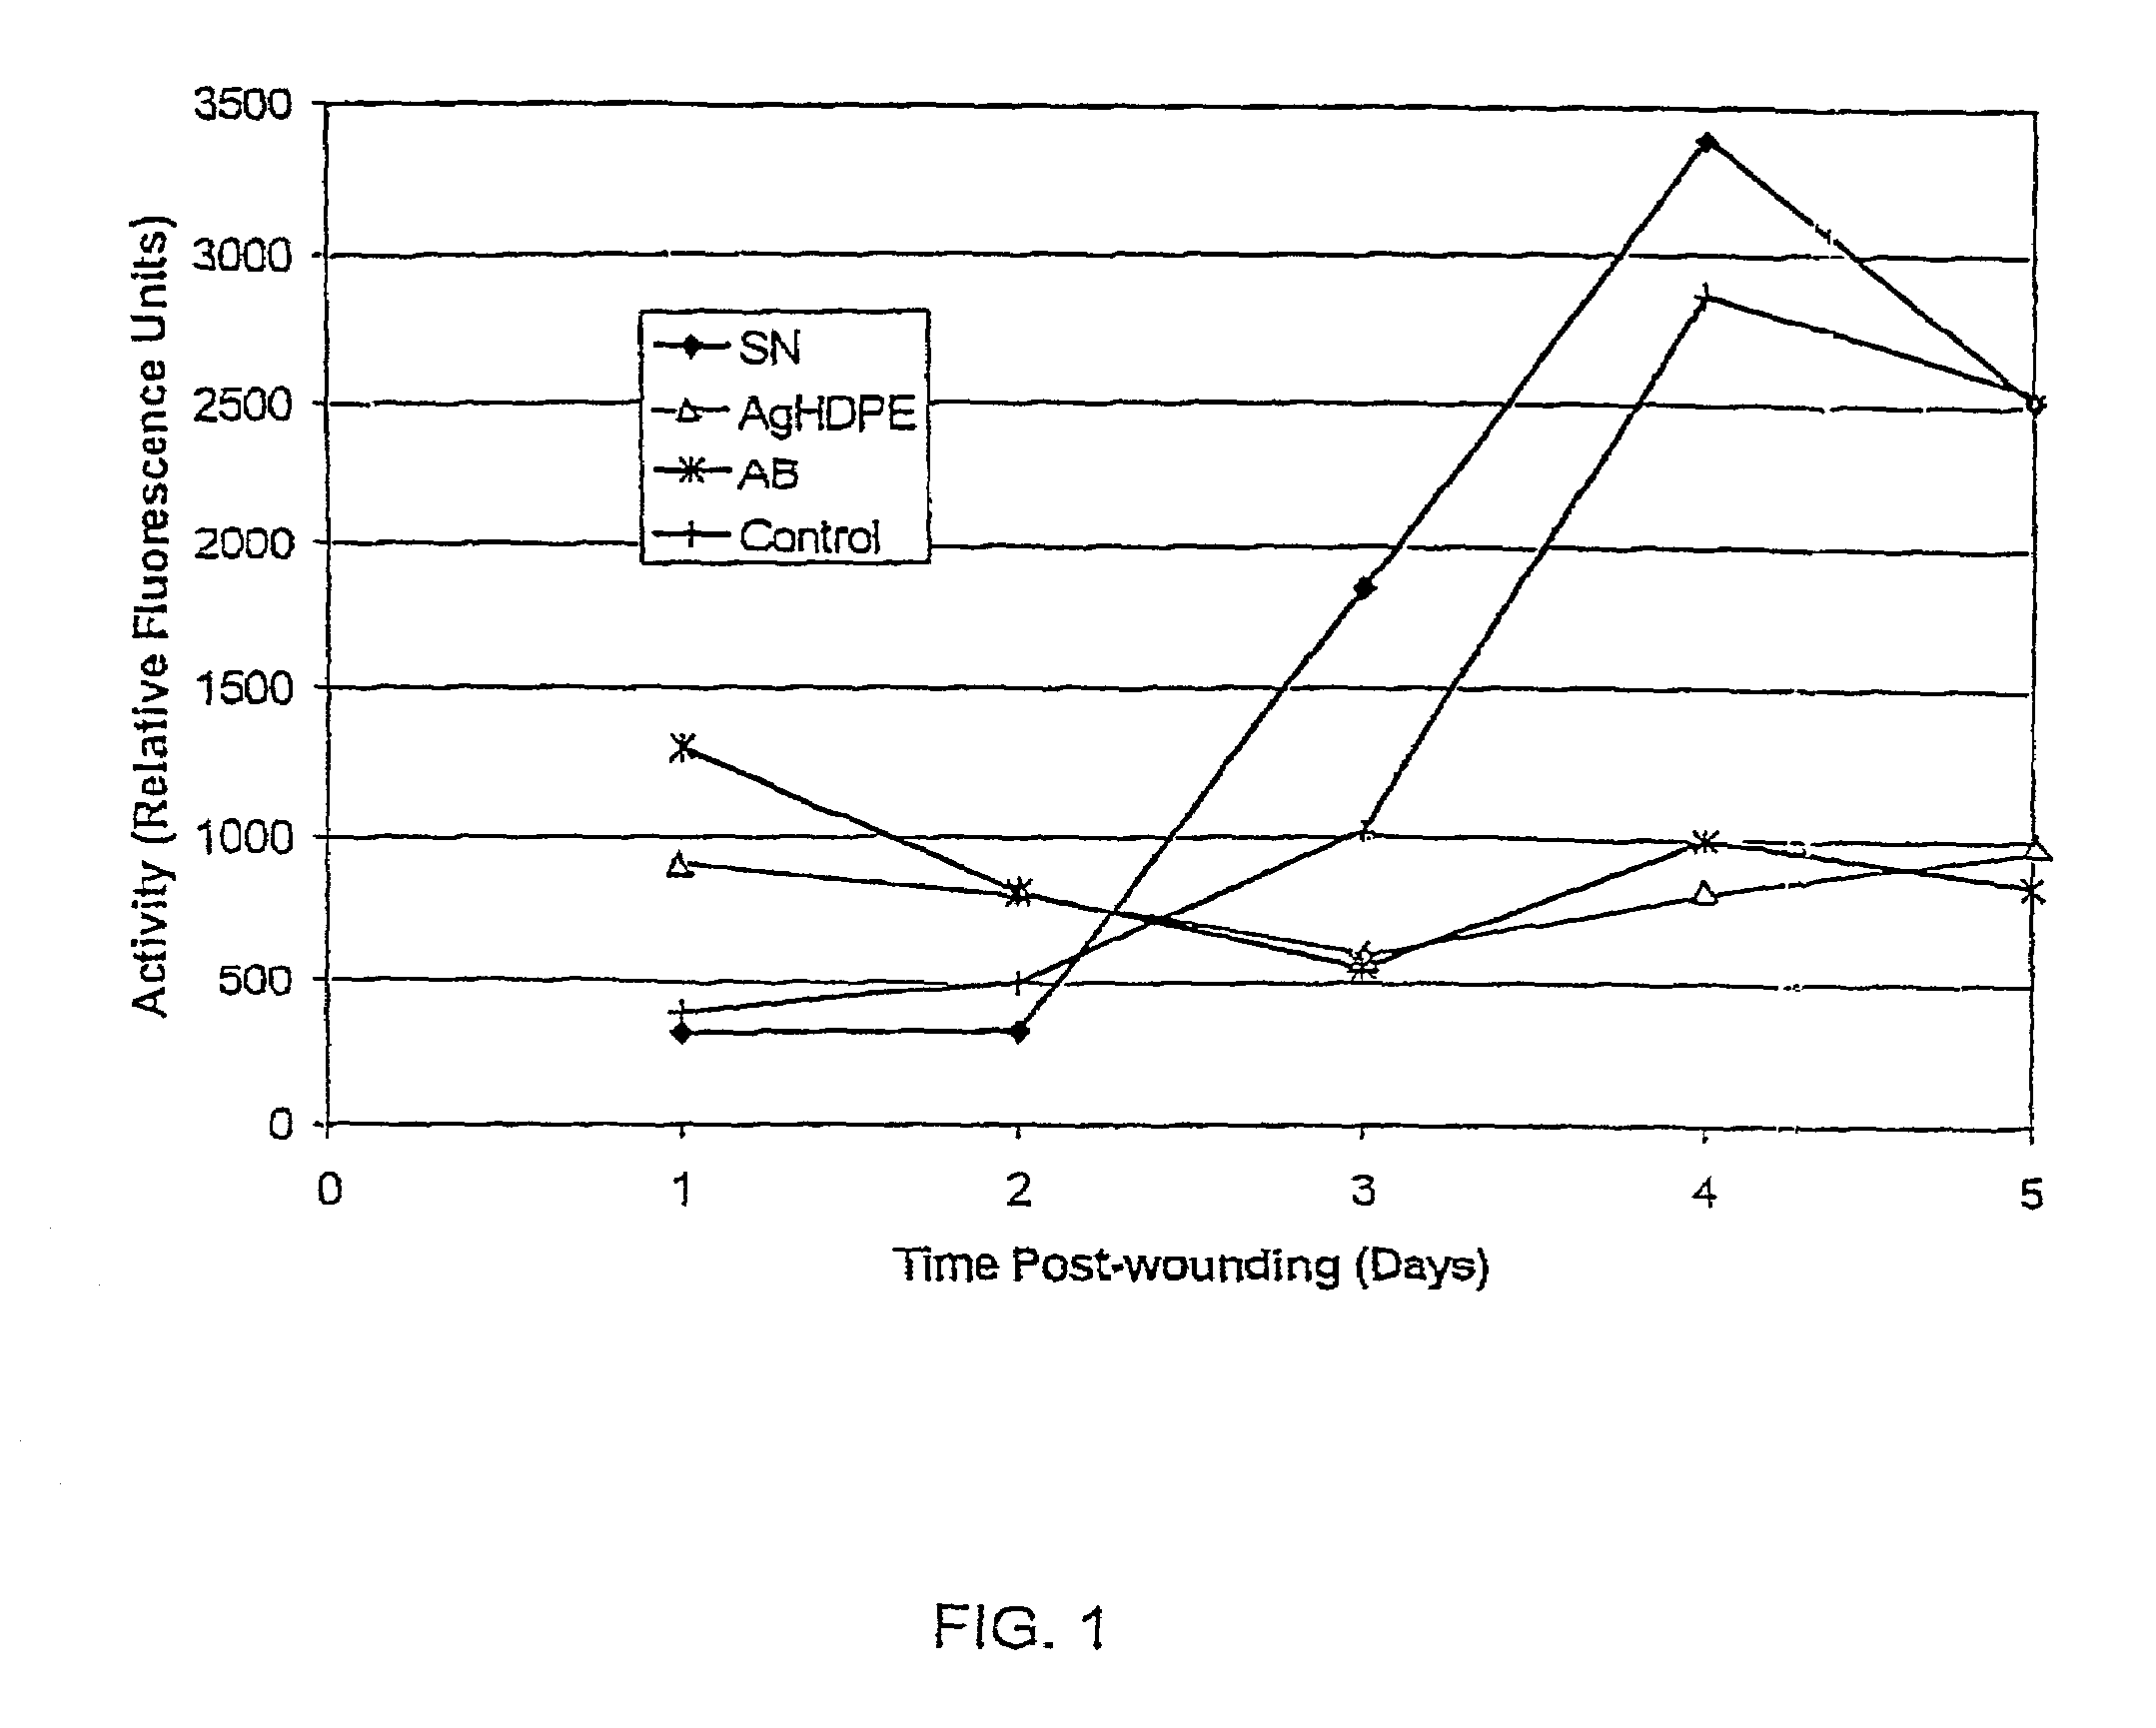 Method of induction of apoptosis and inhibition of matrix metalloproteinases using antimicrobial metals